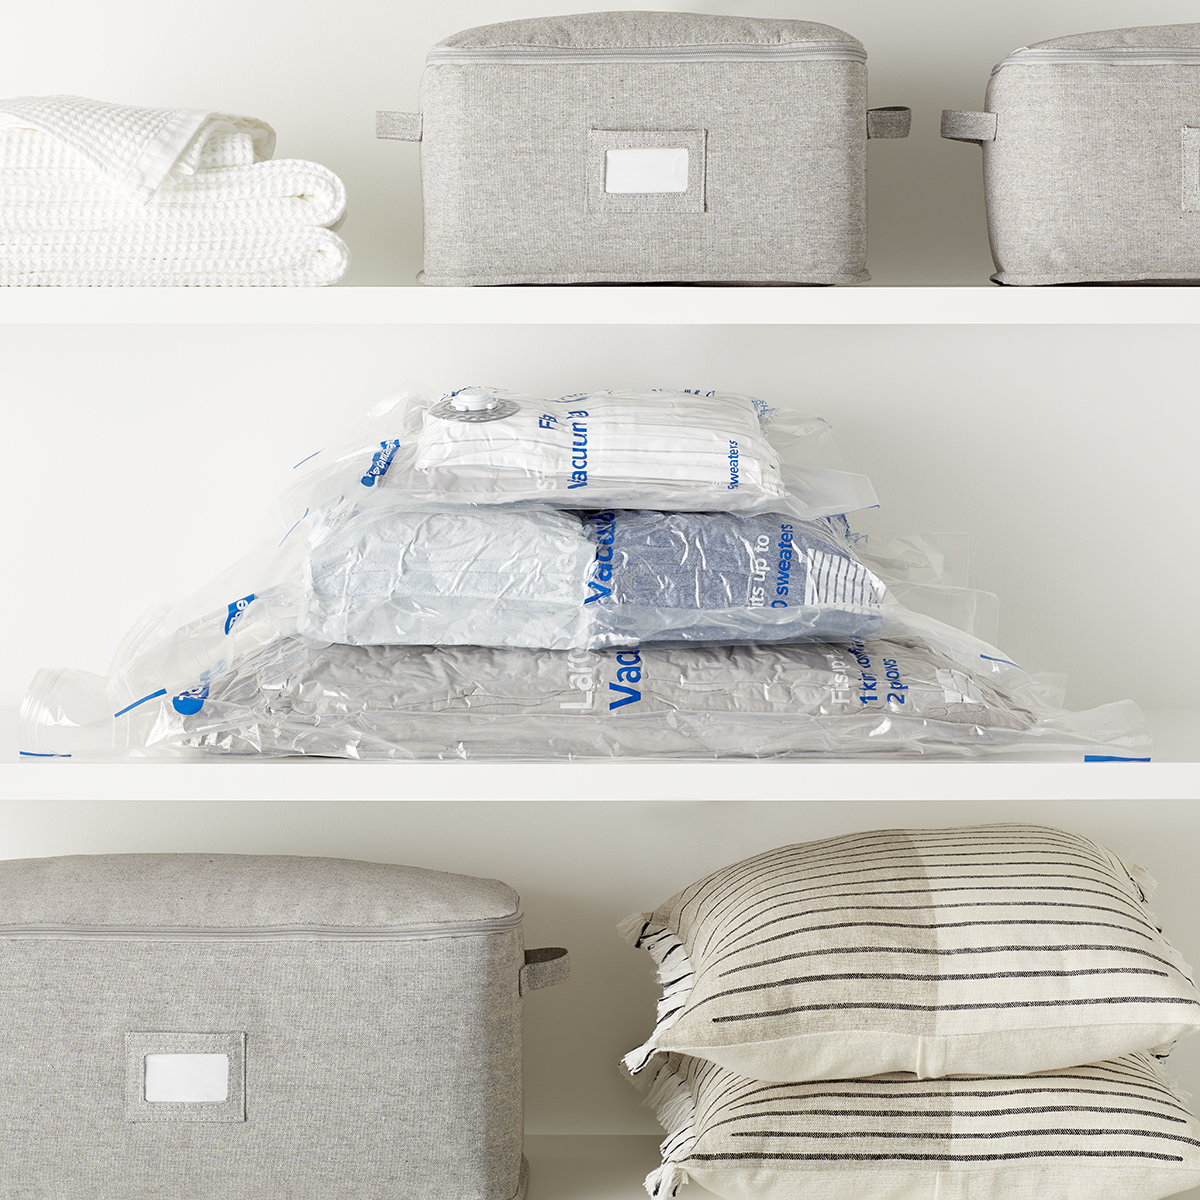 Can Pillows Be Stored in Vacuum Storage Bags?